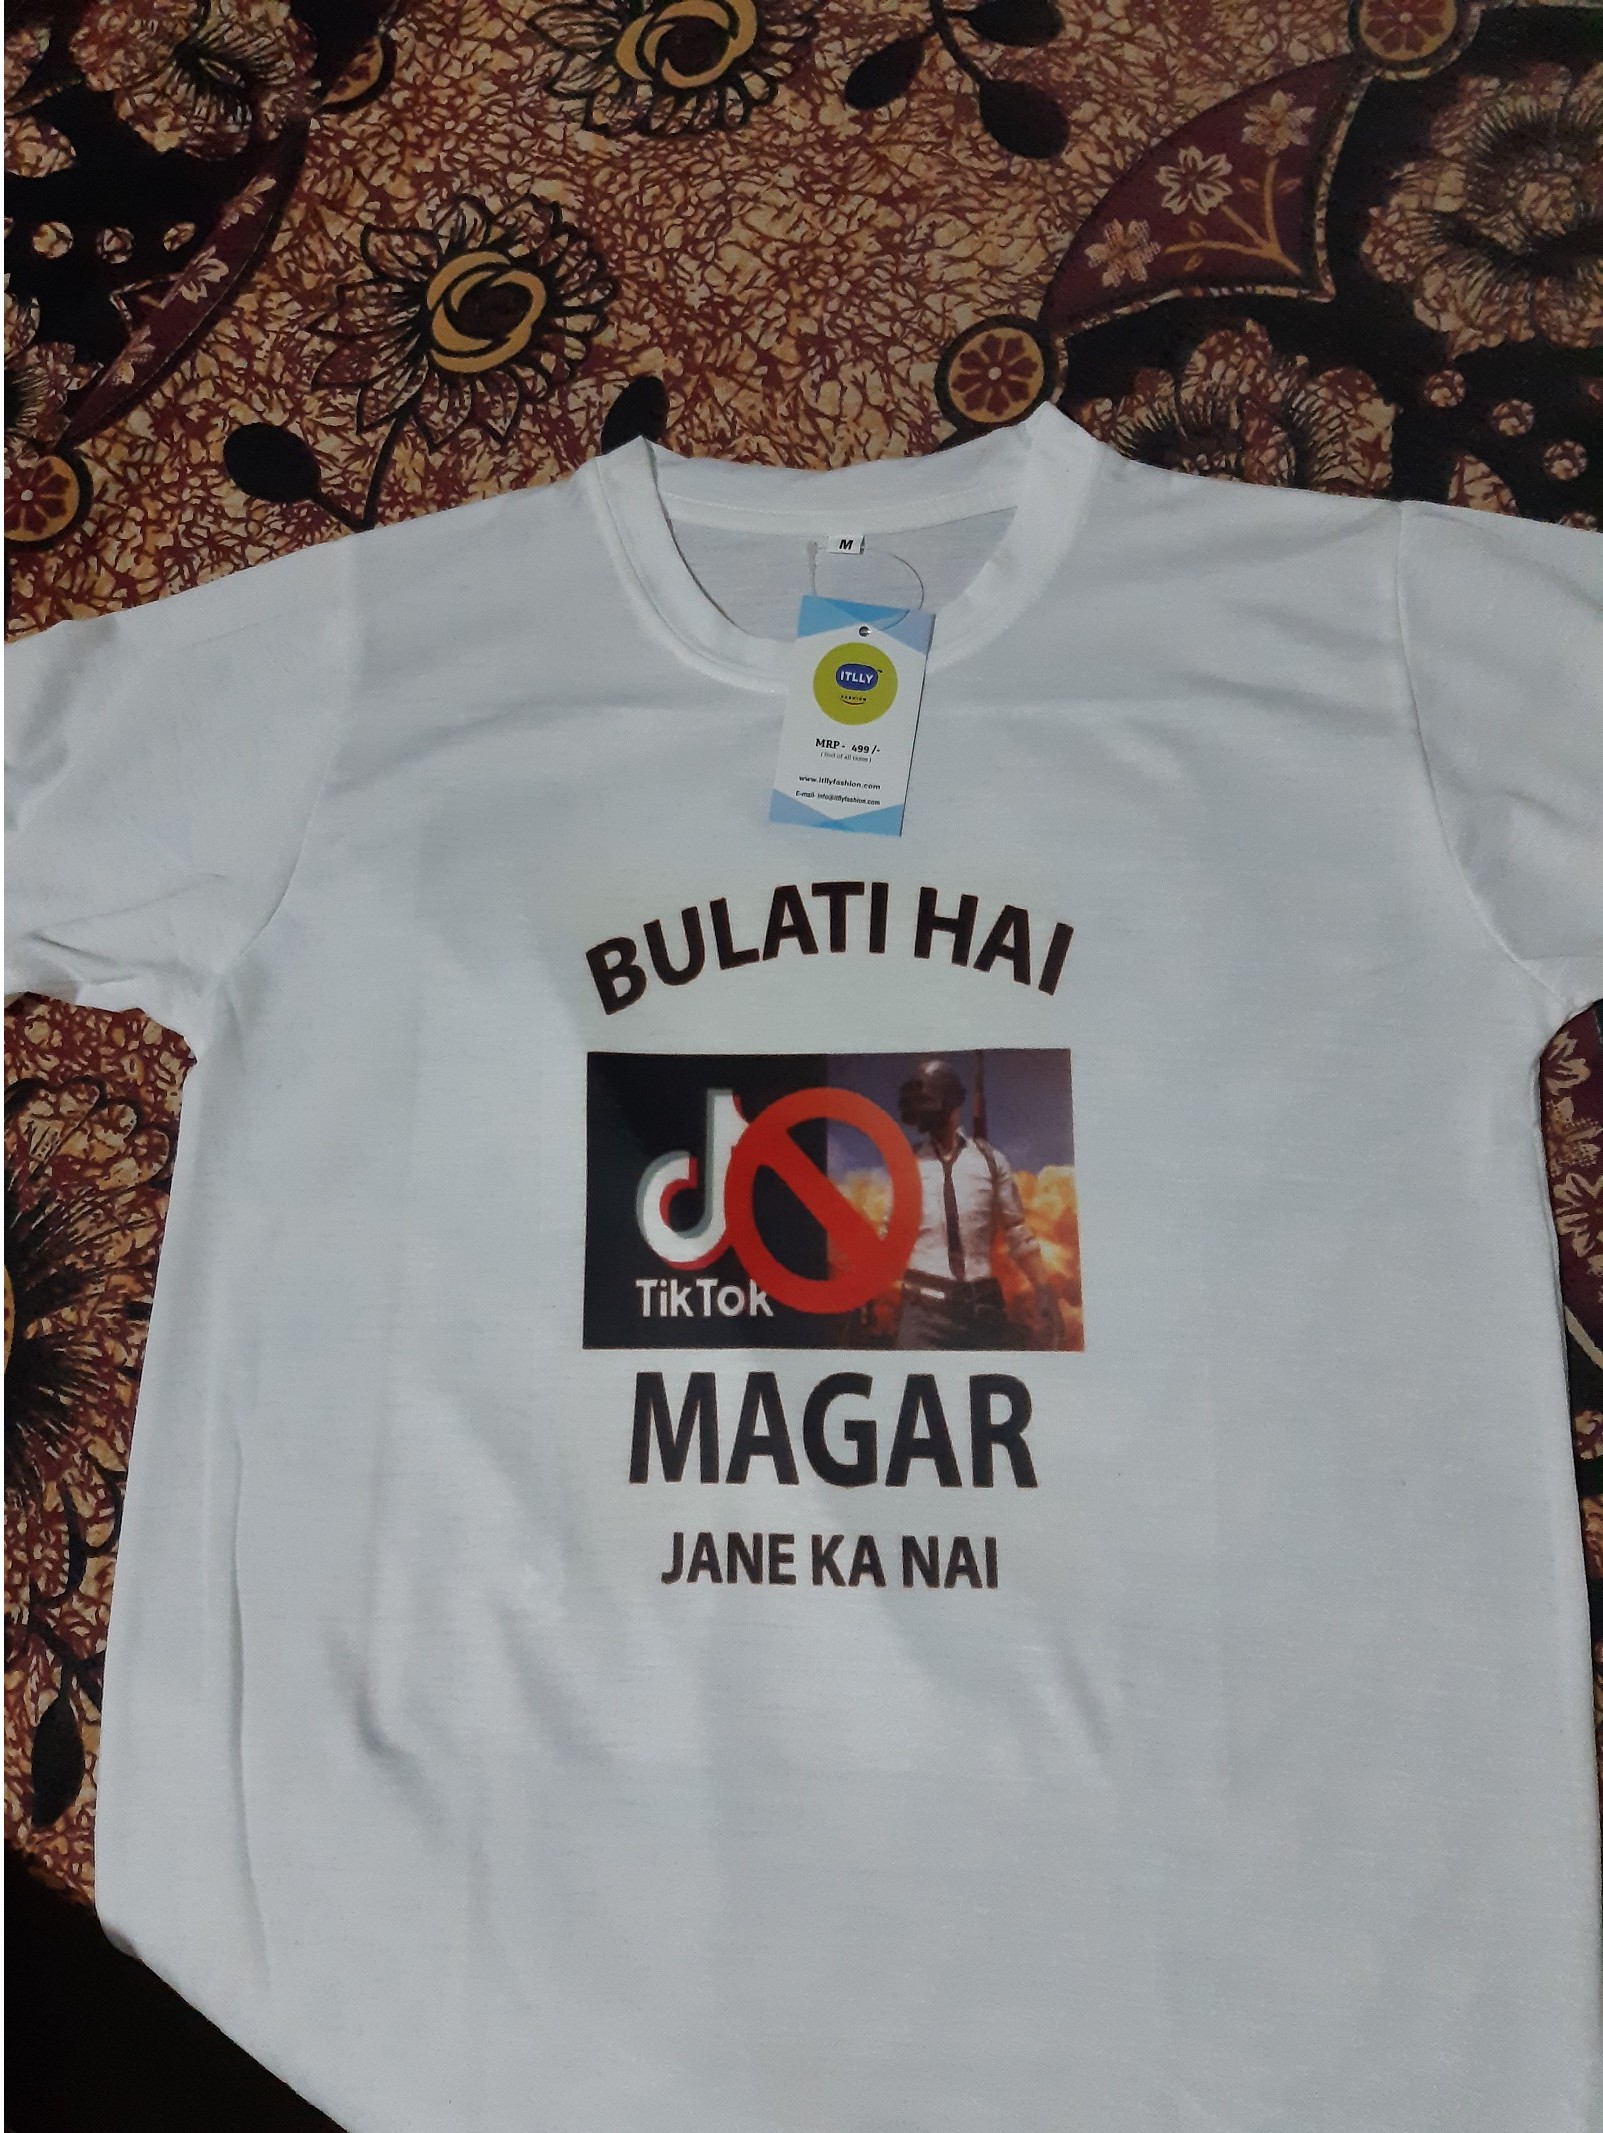 Our customize t-shirt 